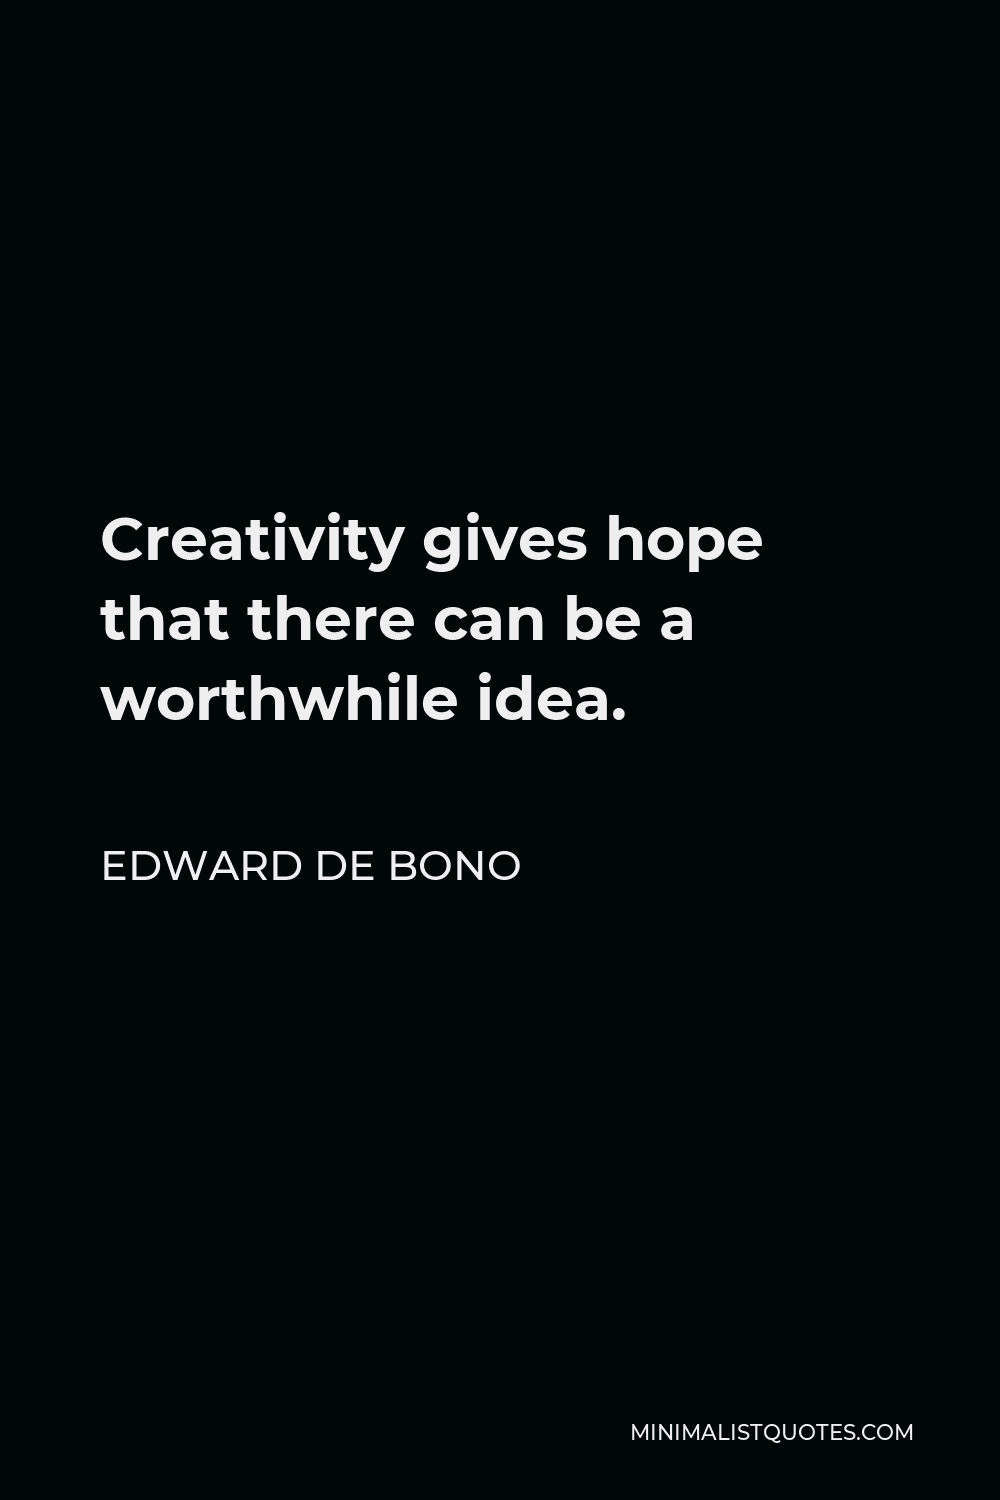 Edward de Bono Quote - Creativity gives hope that there can be a worthwhile idea.